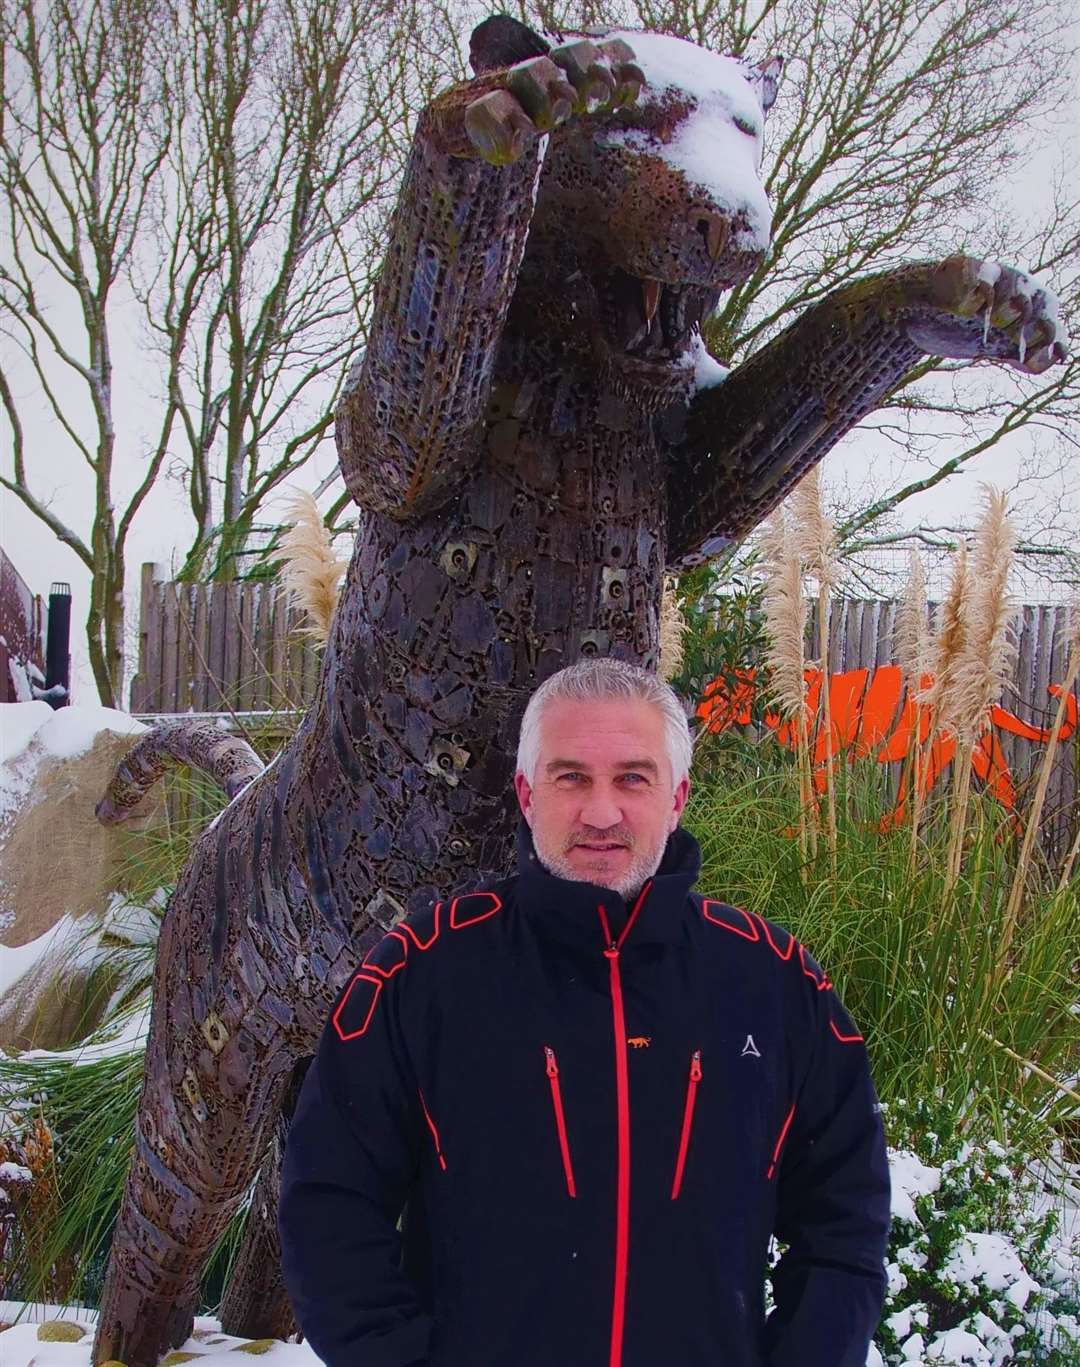 Bake Off star Paul is now an ambassador of the Big Cat Sanctuary in Smarden